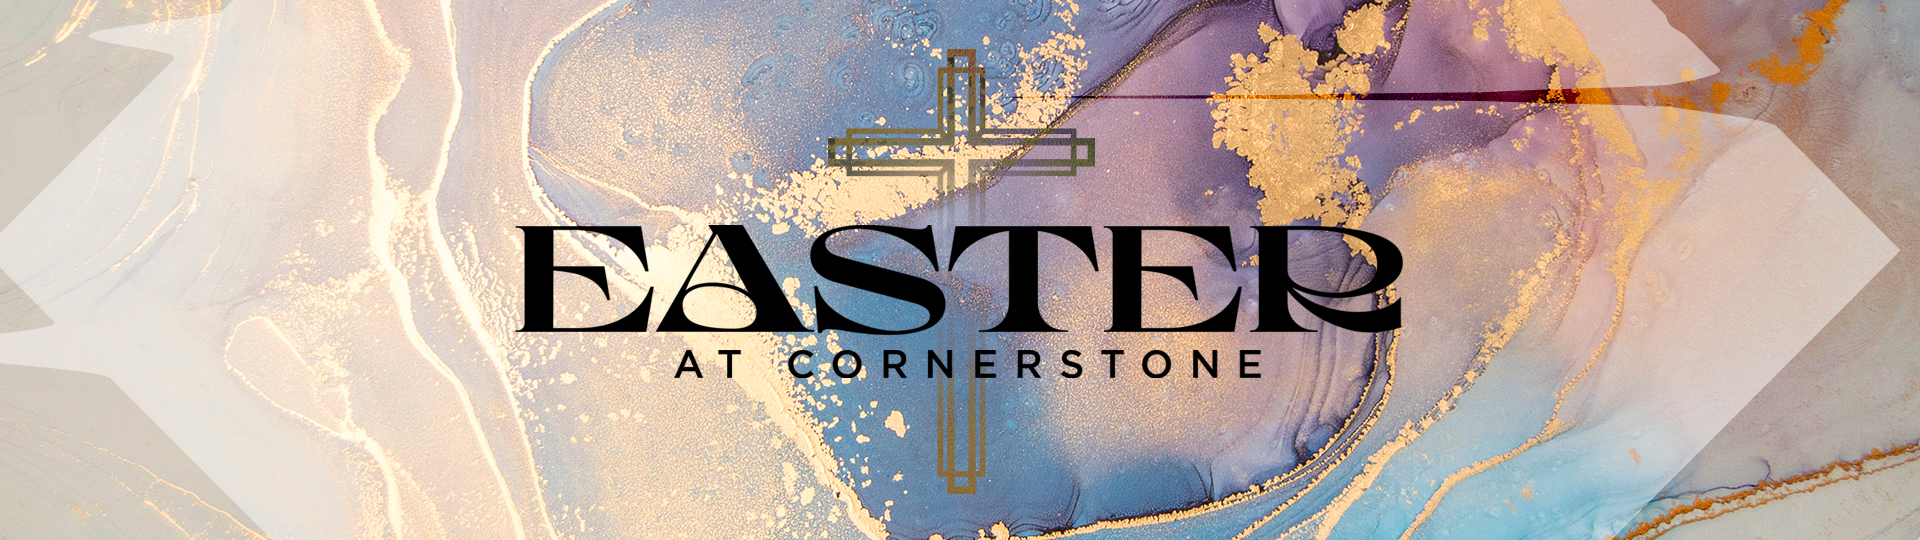 Easter at Cornerstone